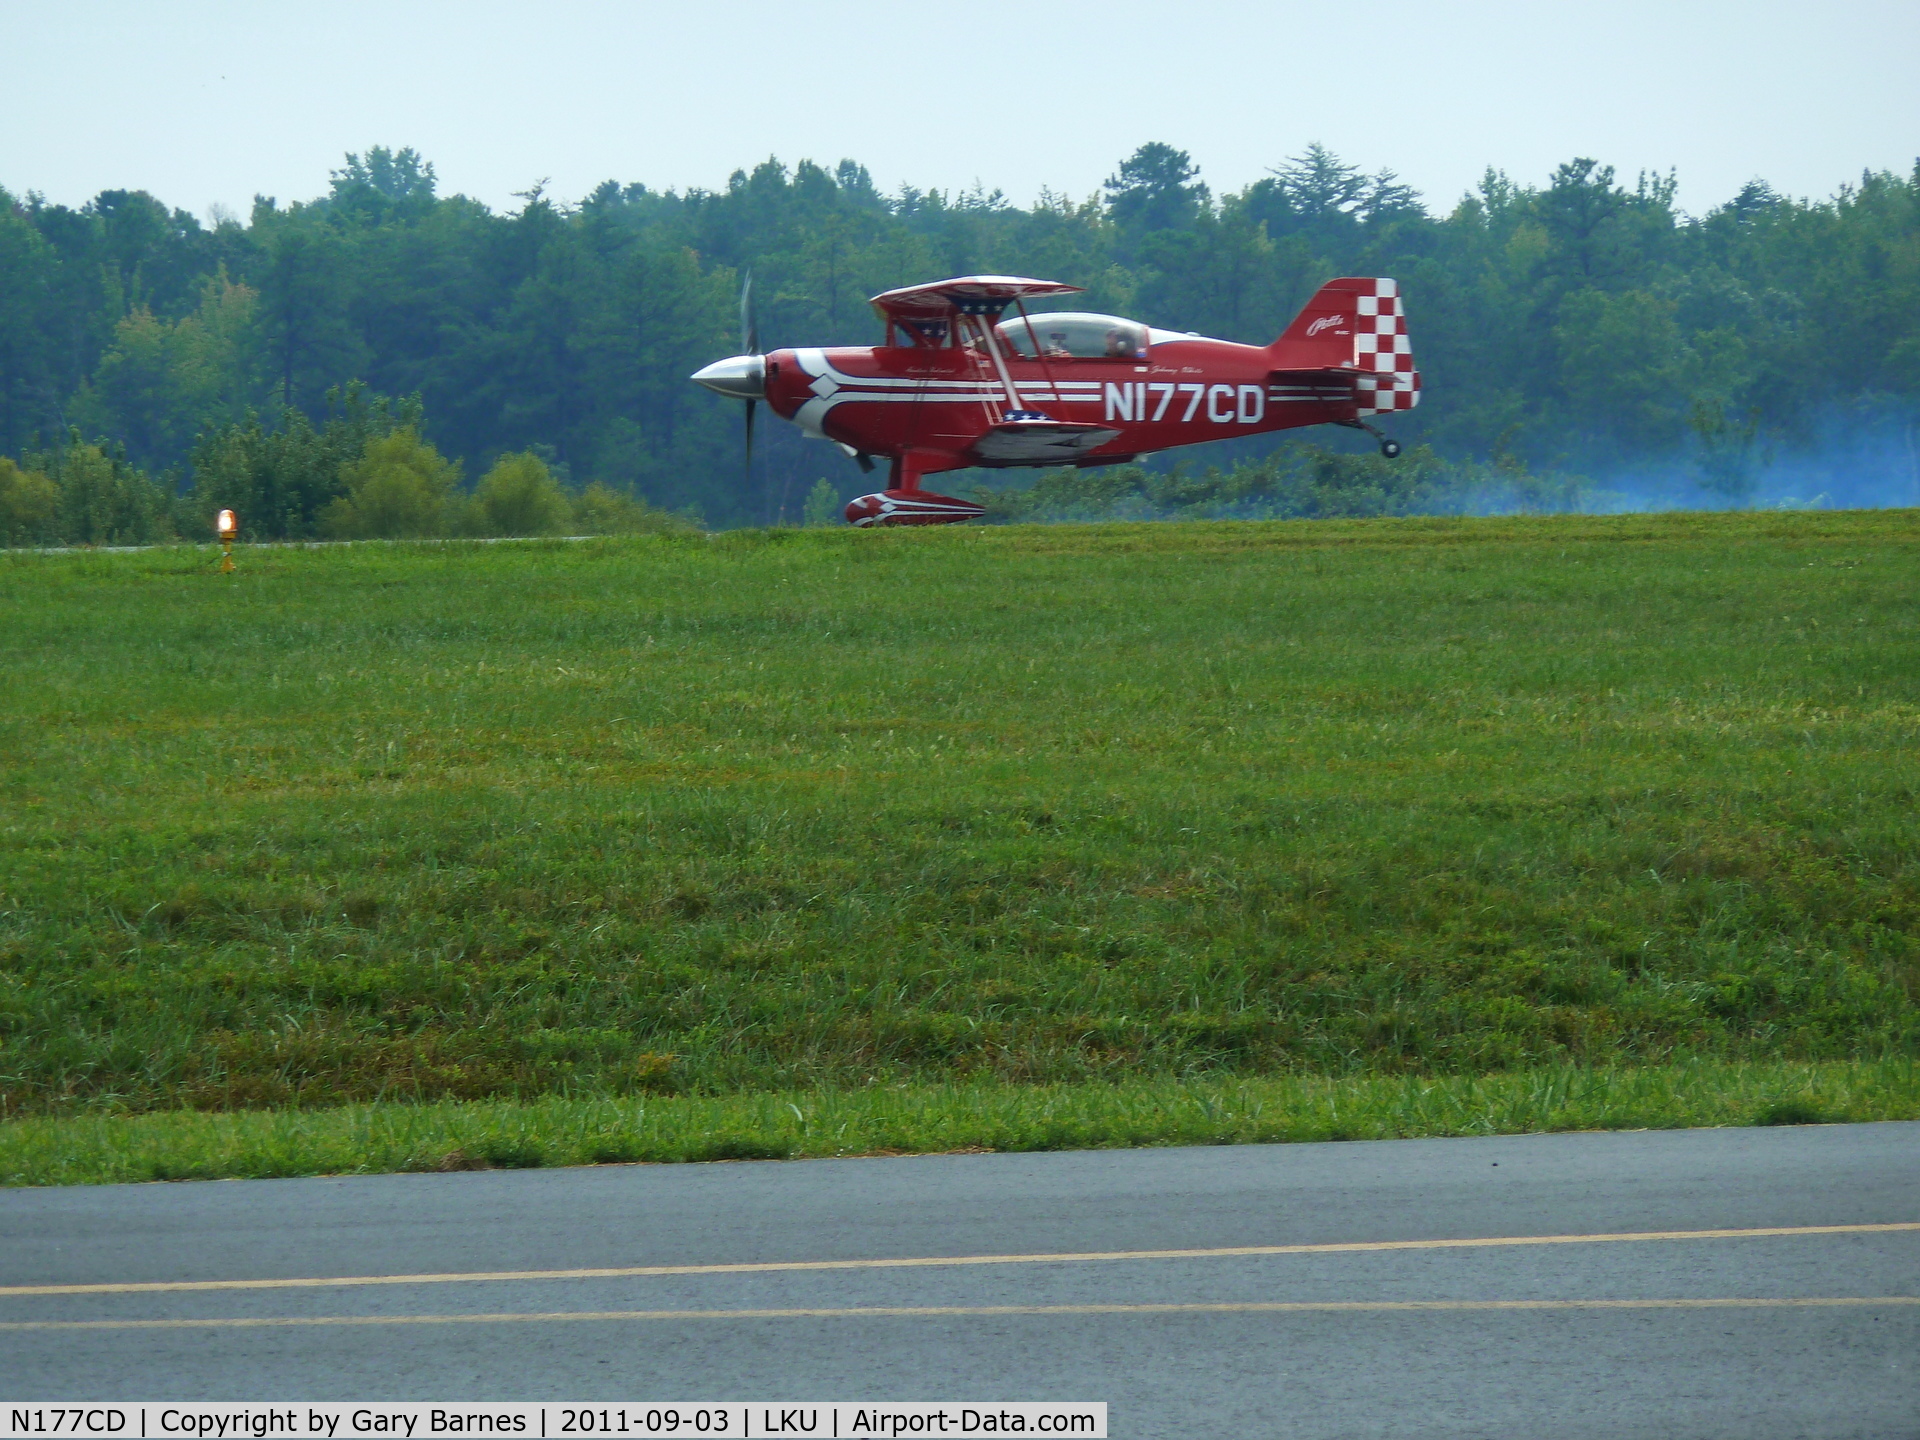 N177CD, 2004 Aviat Pitts S-2C Special C/N 6069, Landing at Freeman Field during the Louisa County Air Show, 2011